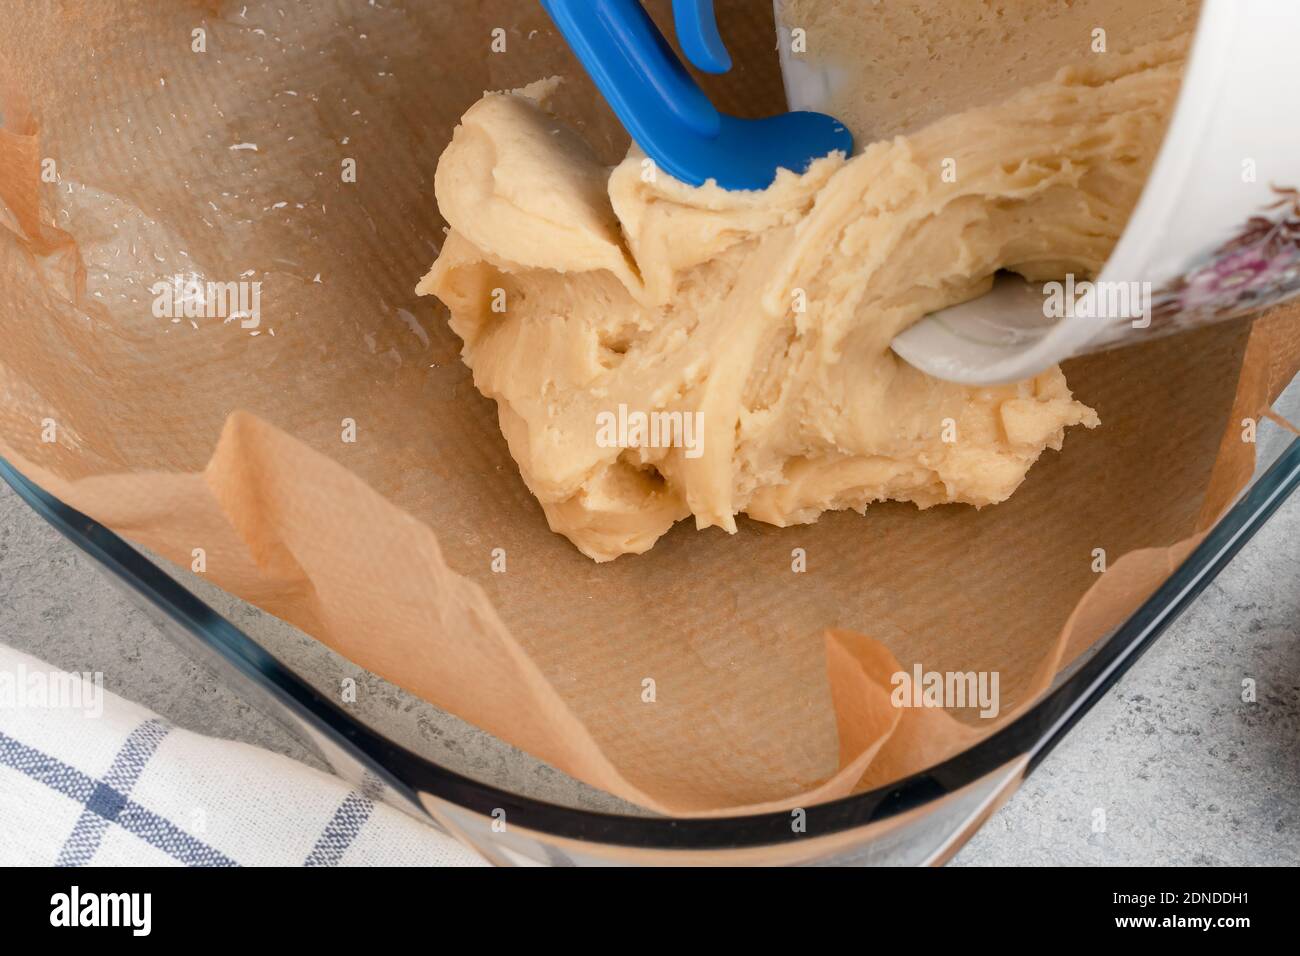 Putting the pie dough into a baking dish Stock Photo